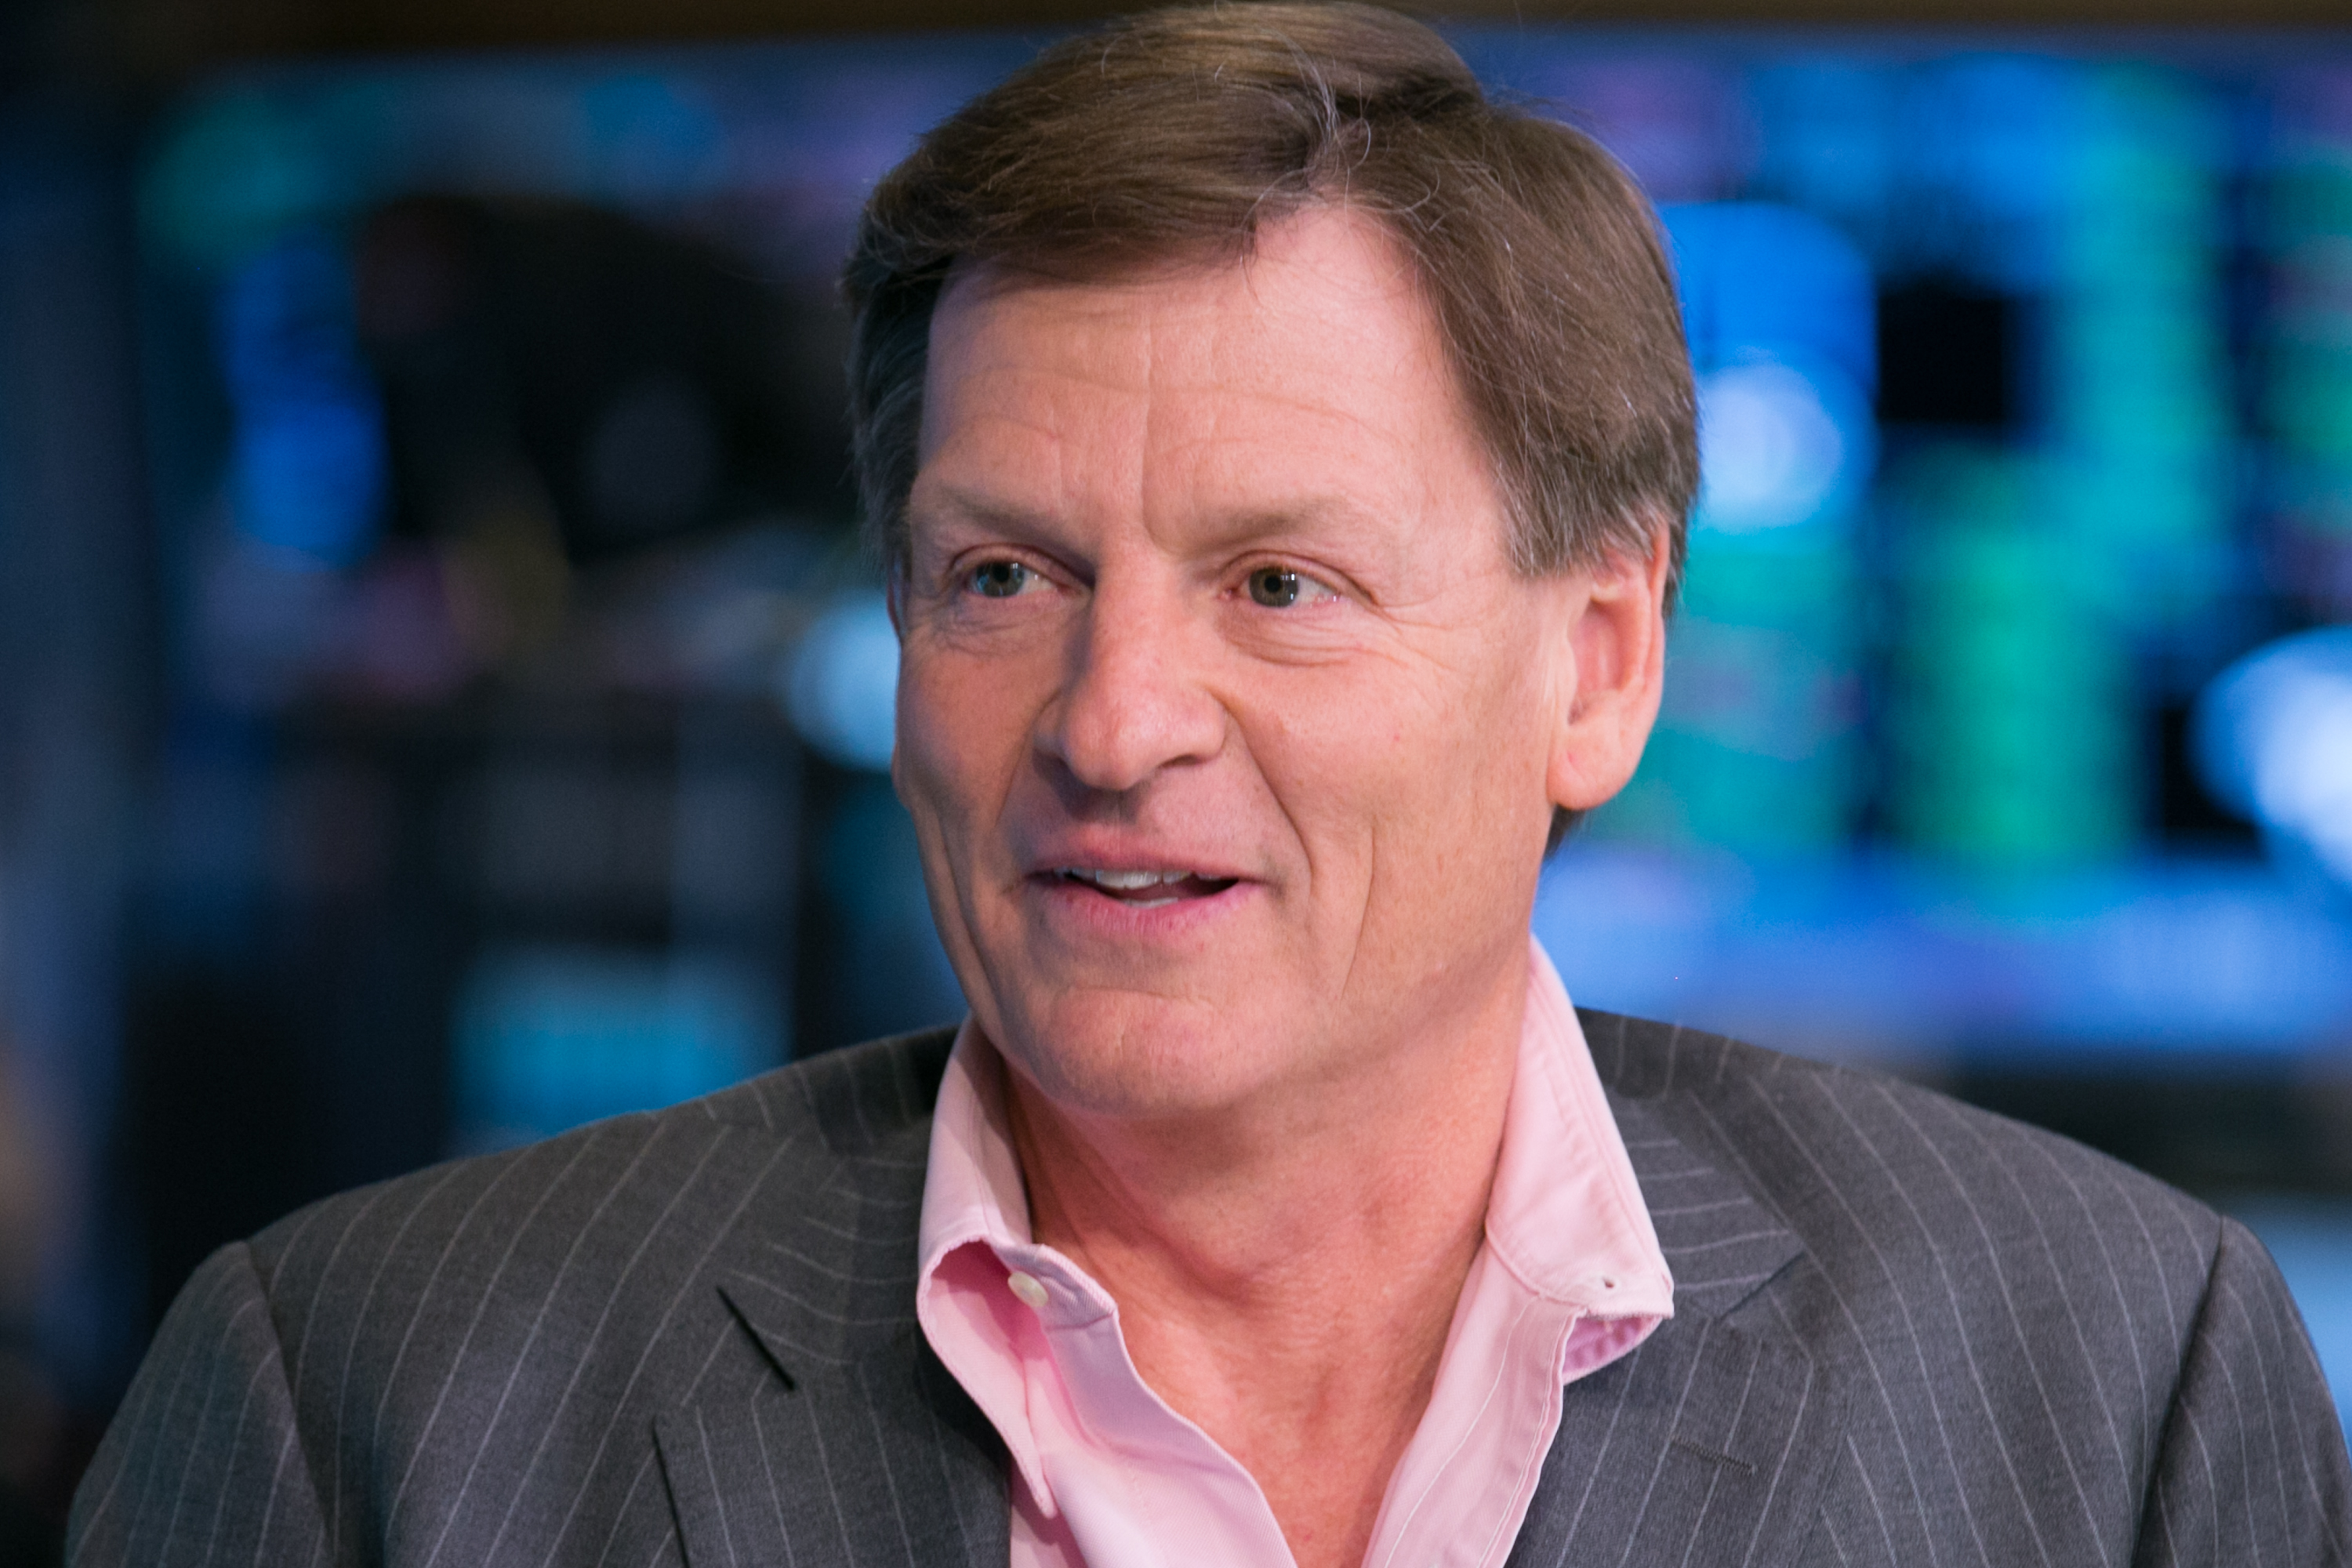 Michael Lewis, bestselling author of 